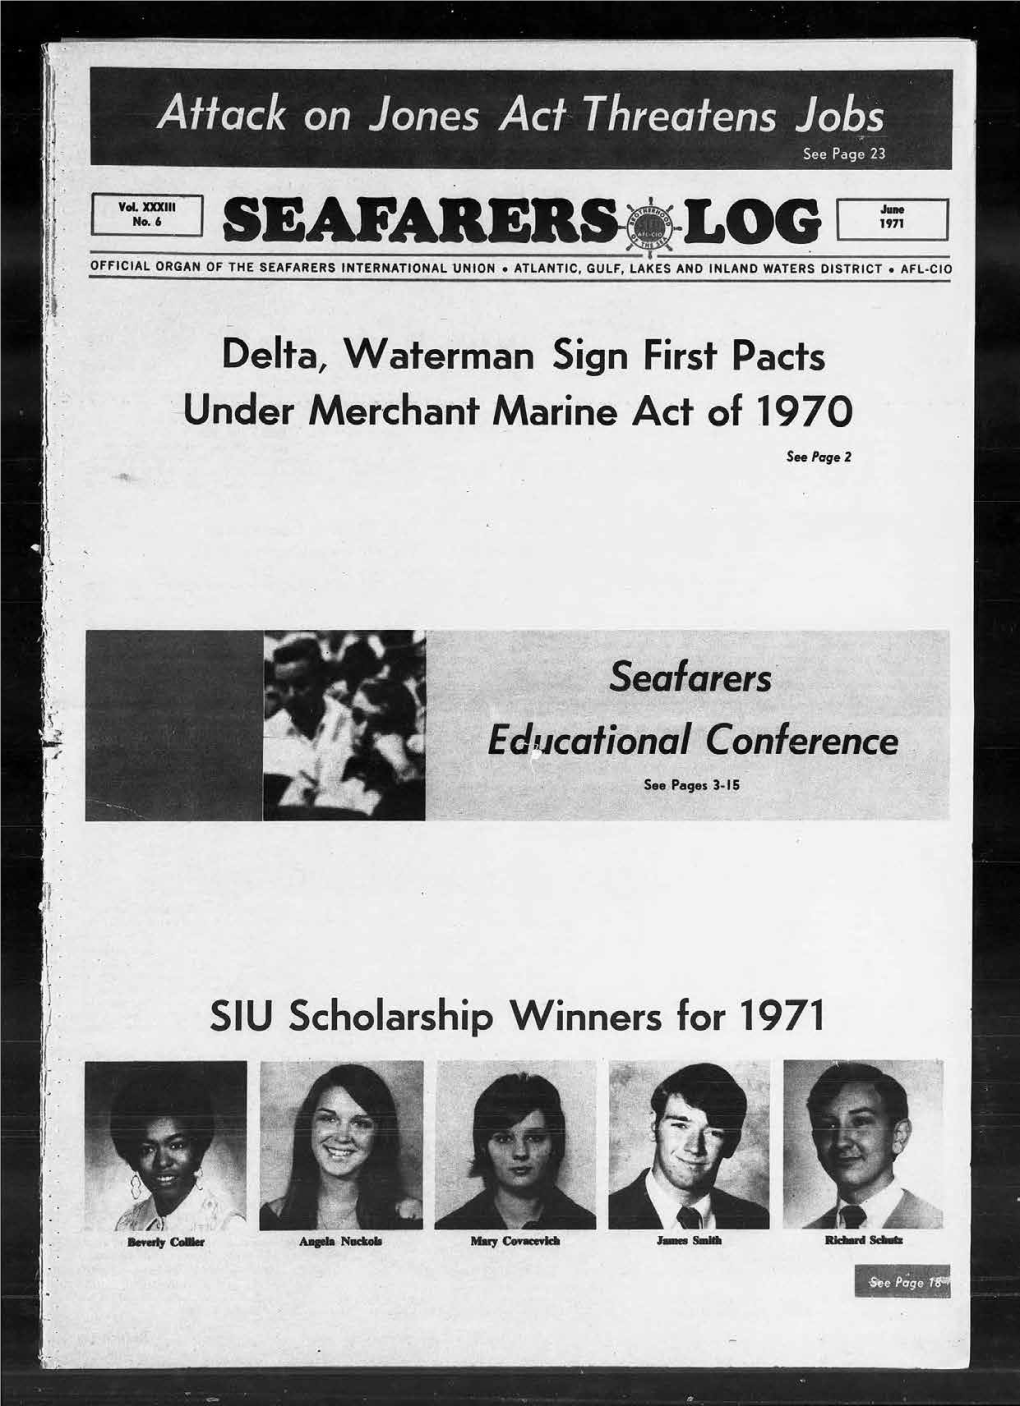 Seafarersalog Official Organ of the Seafarers International Union • Atlantic, Gulf, Lakes and Inland Waters District • Afl-Cio